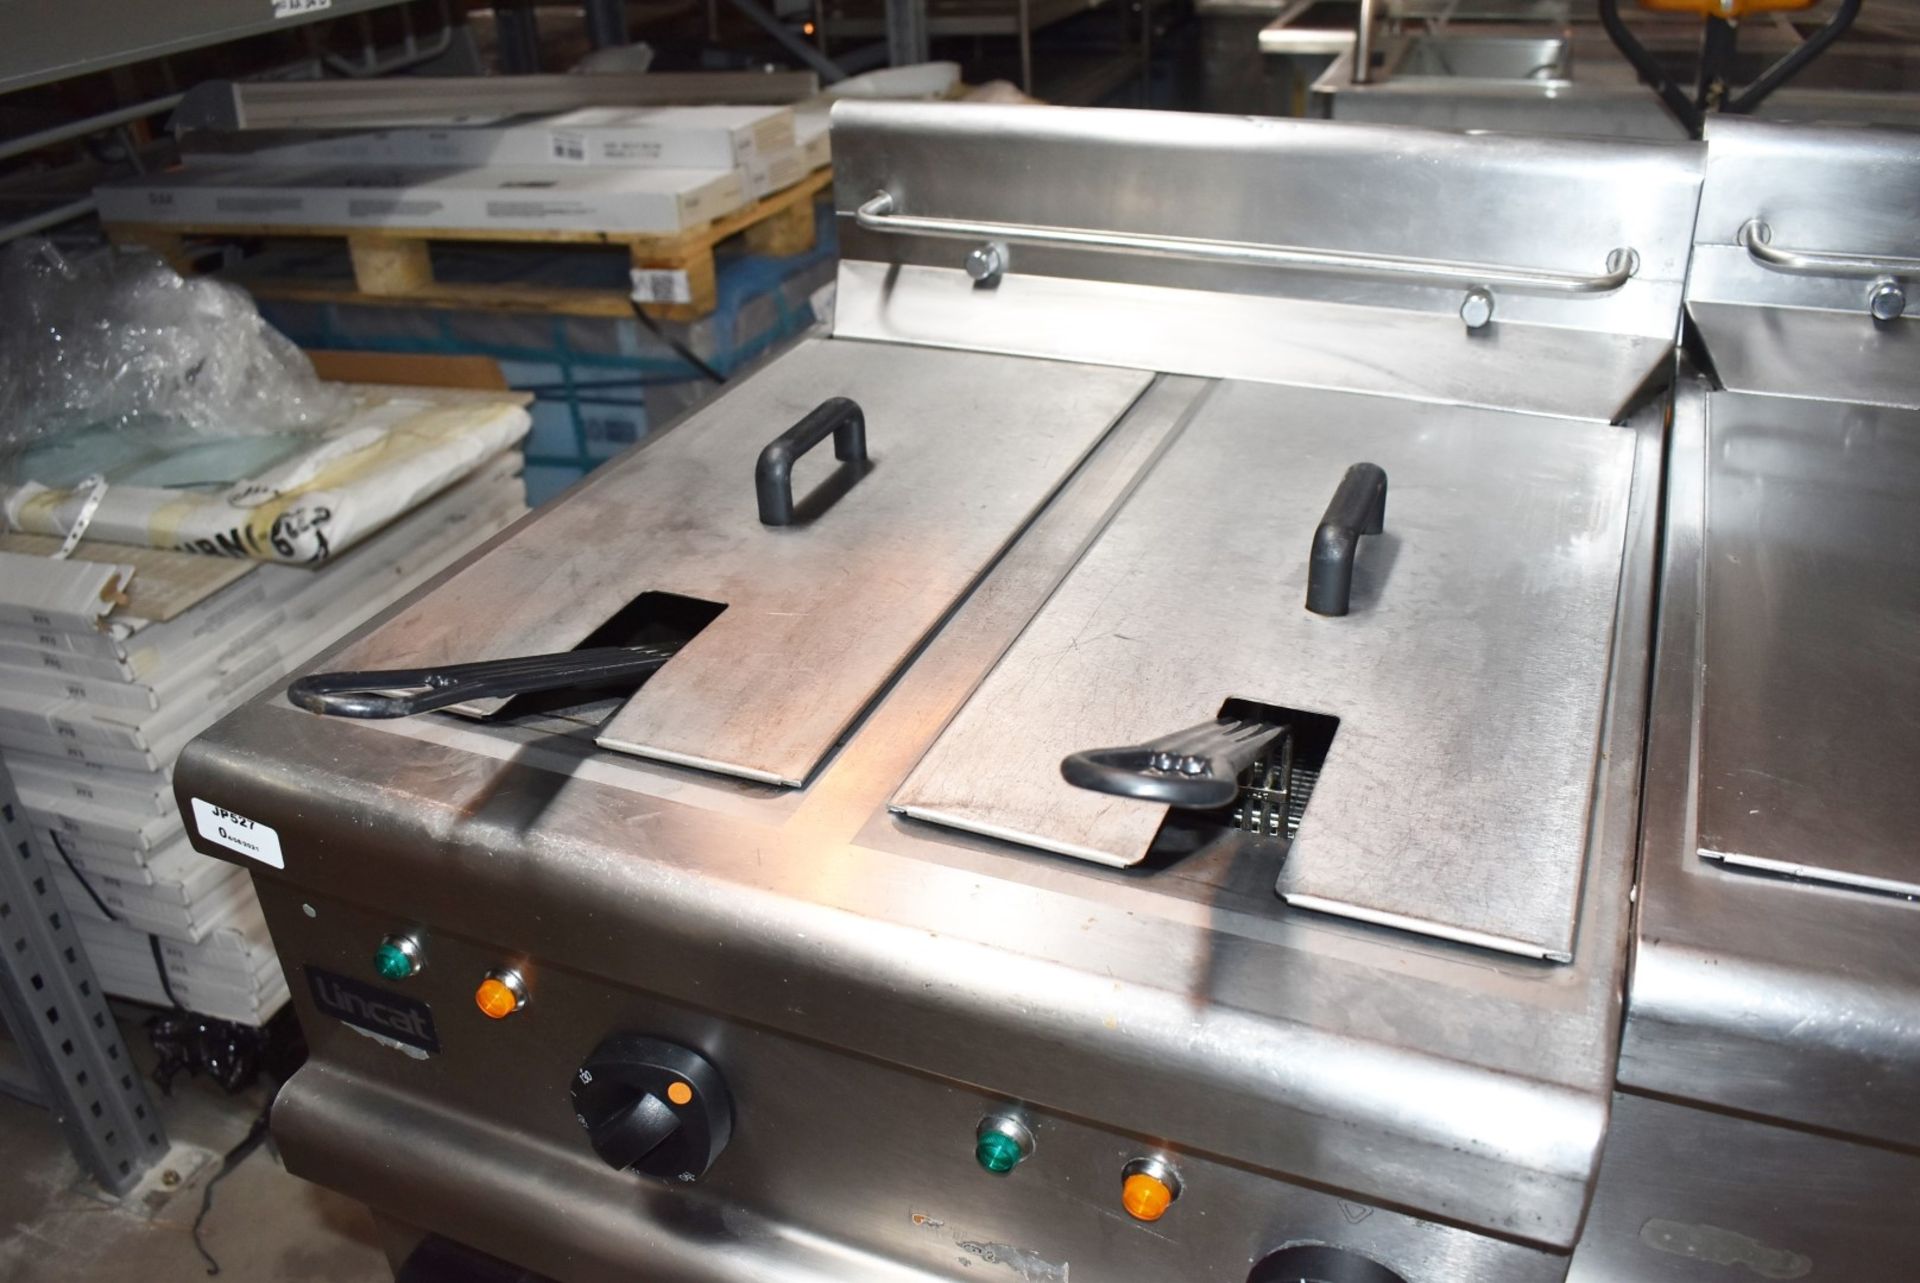 1 x Lincat Opus 700 OE7113 Single Large Tank Electric Fryer With Built In Filteration - 240V / 3PH P - Image 6 of 14